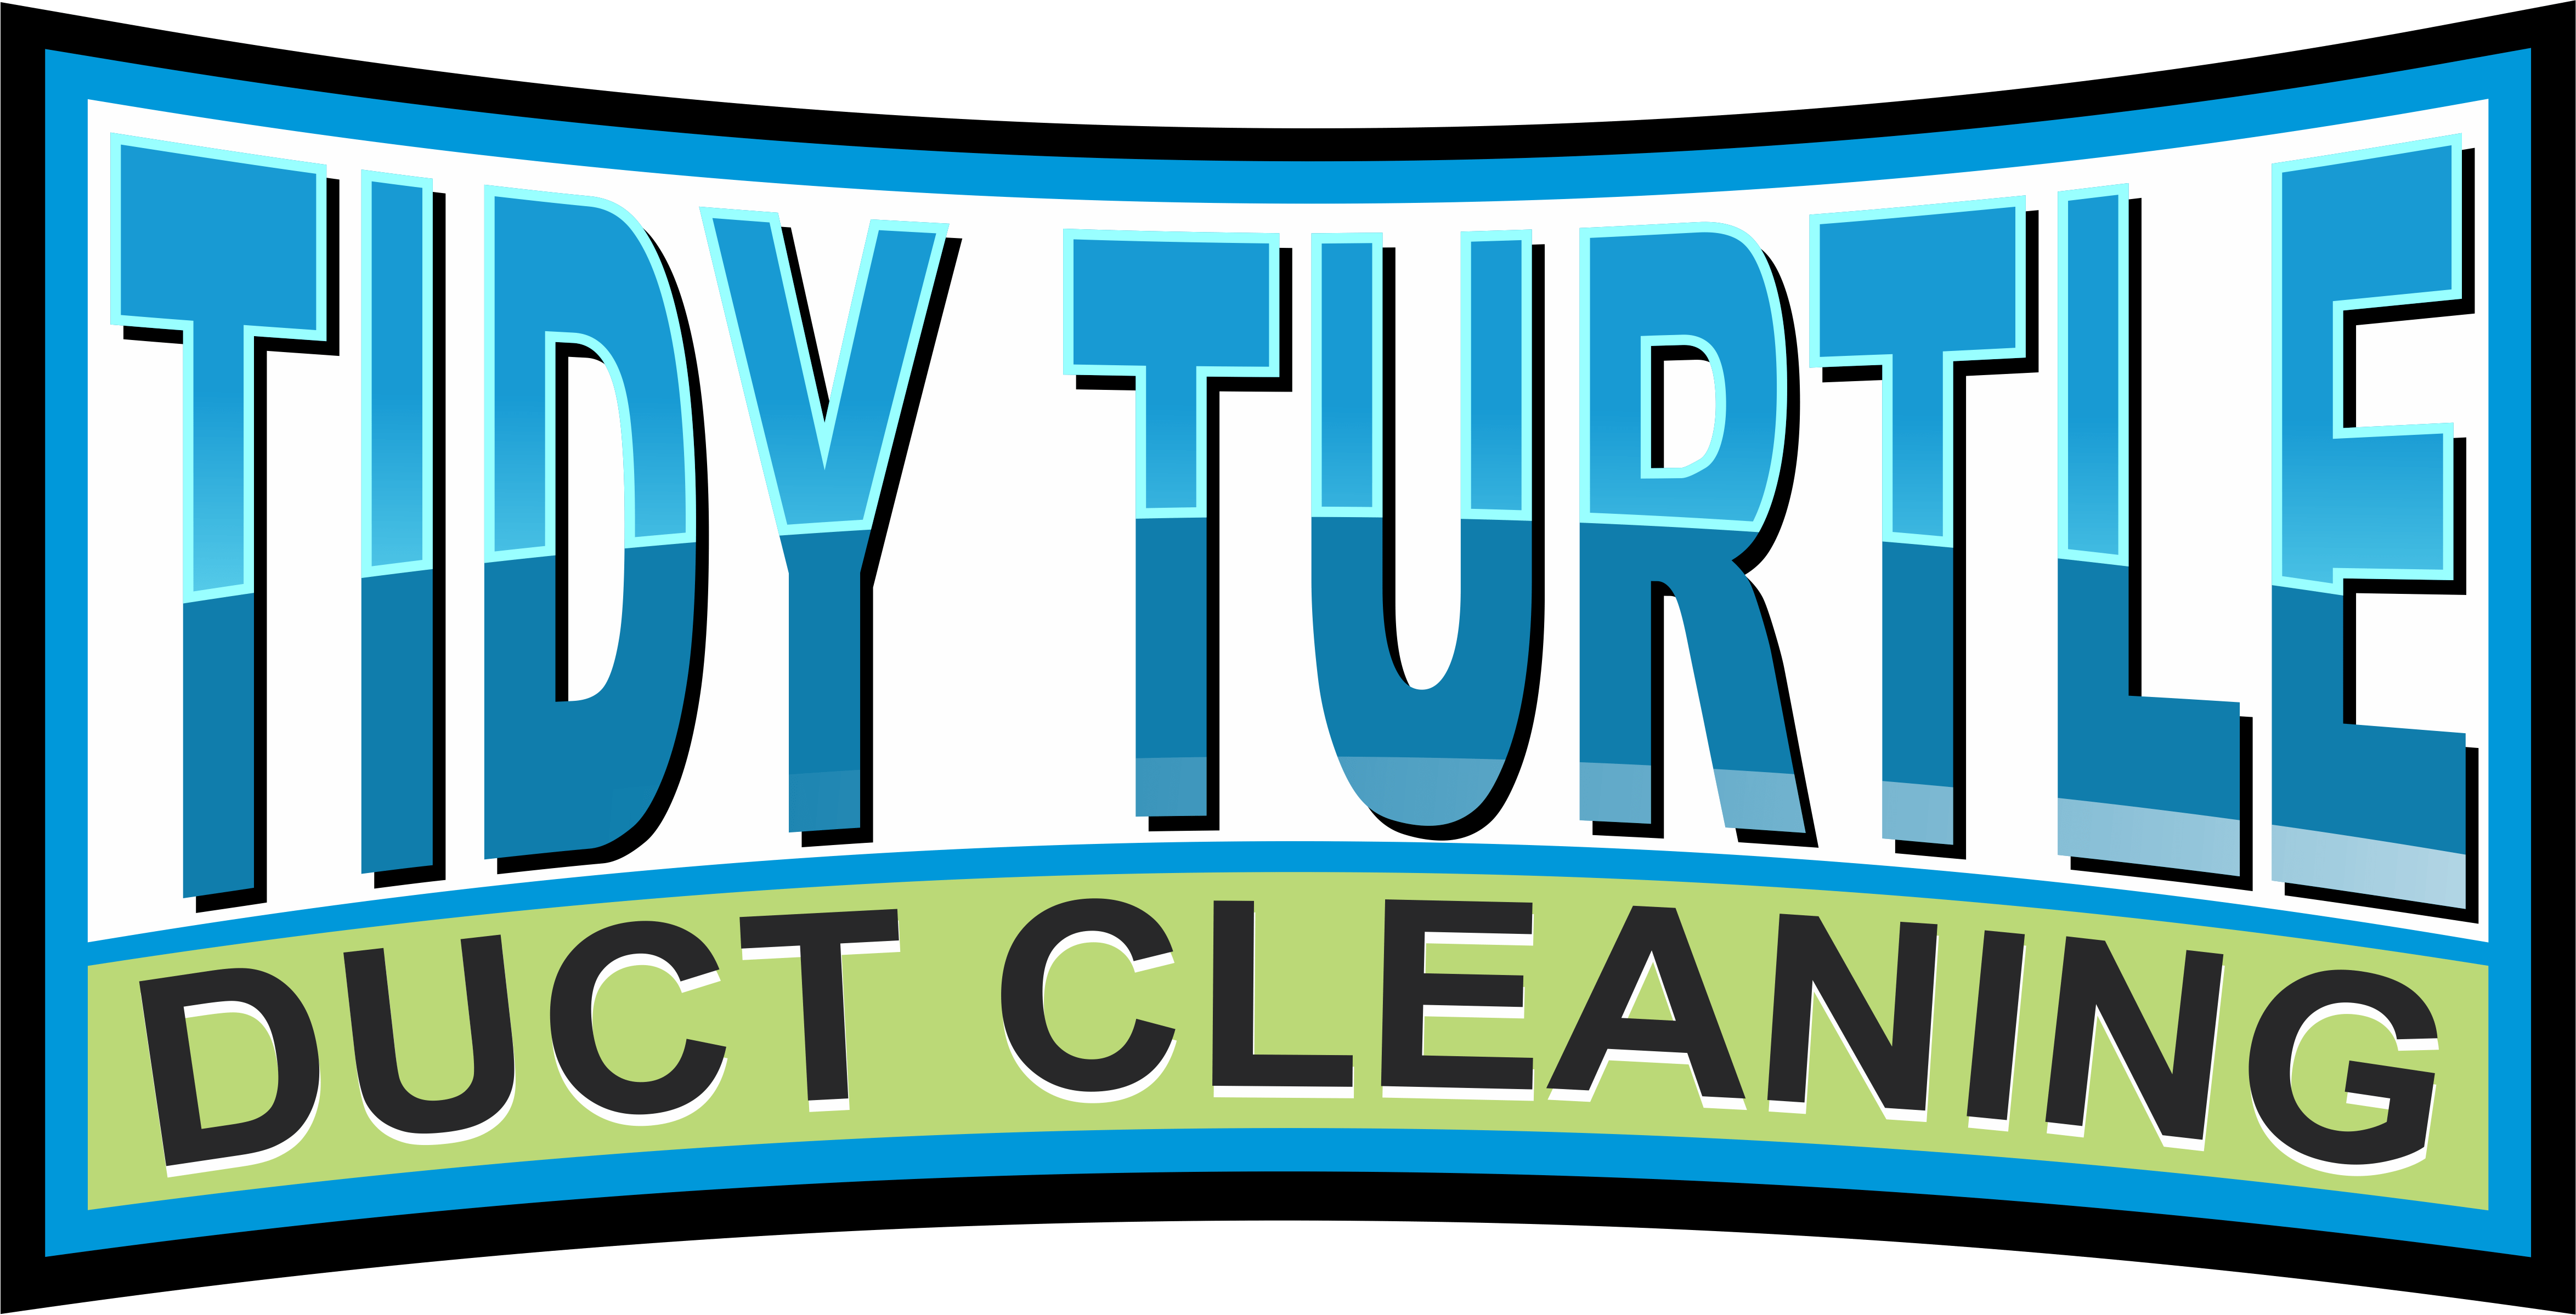 Tidy Turtle Duct CleaningLogo